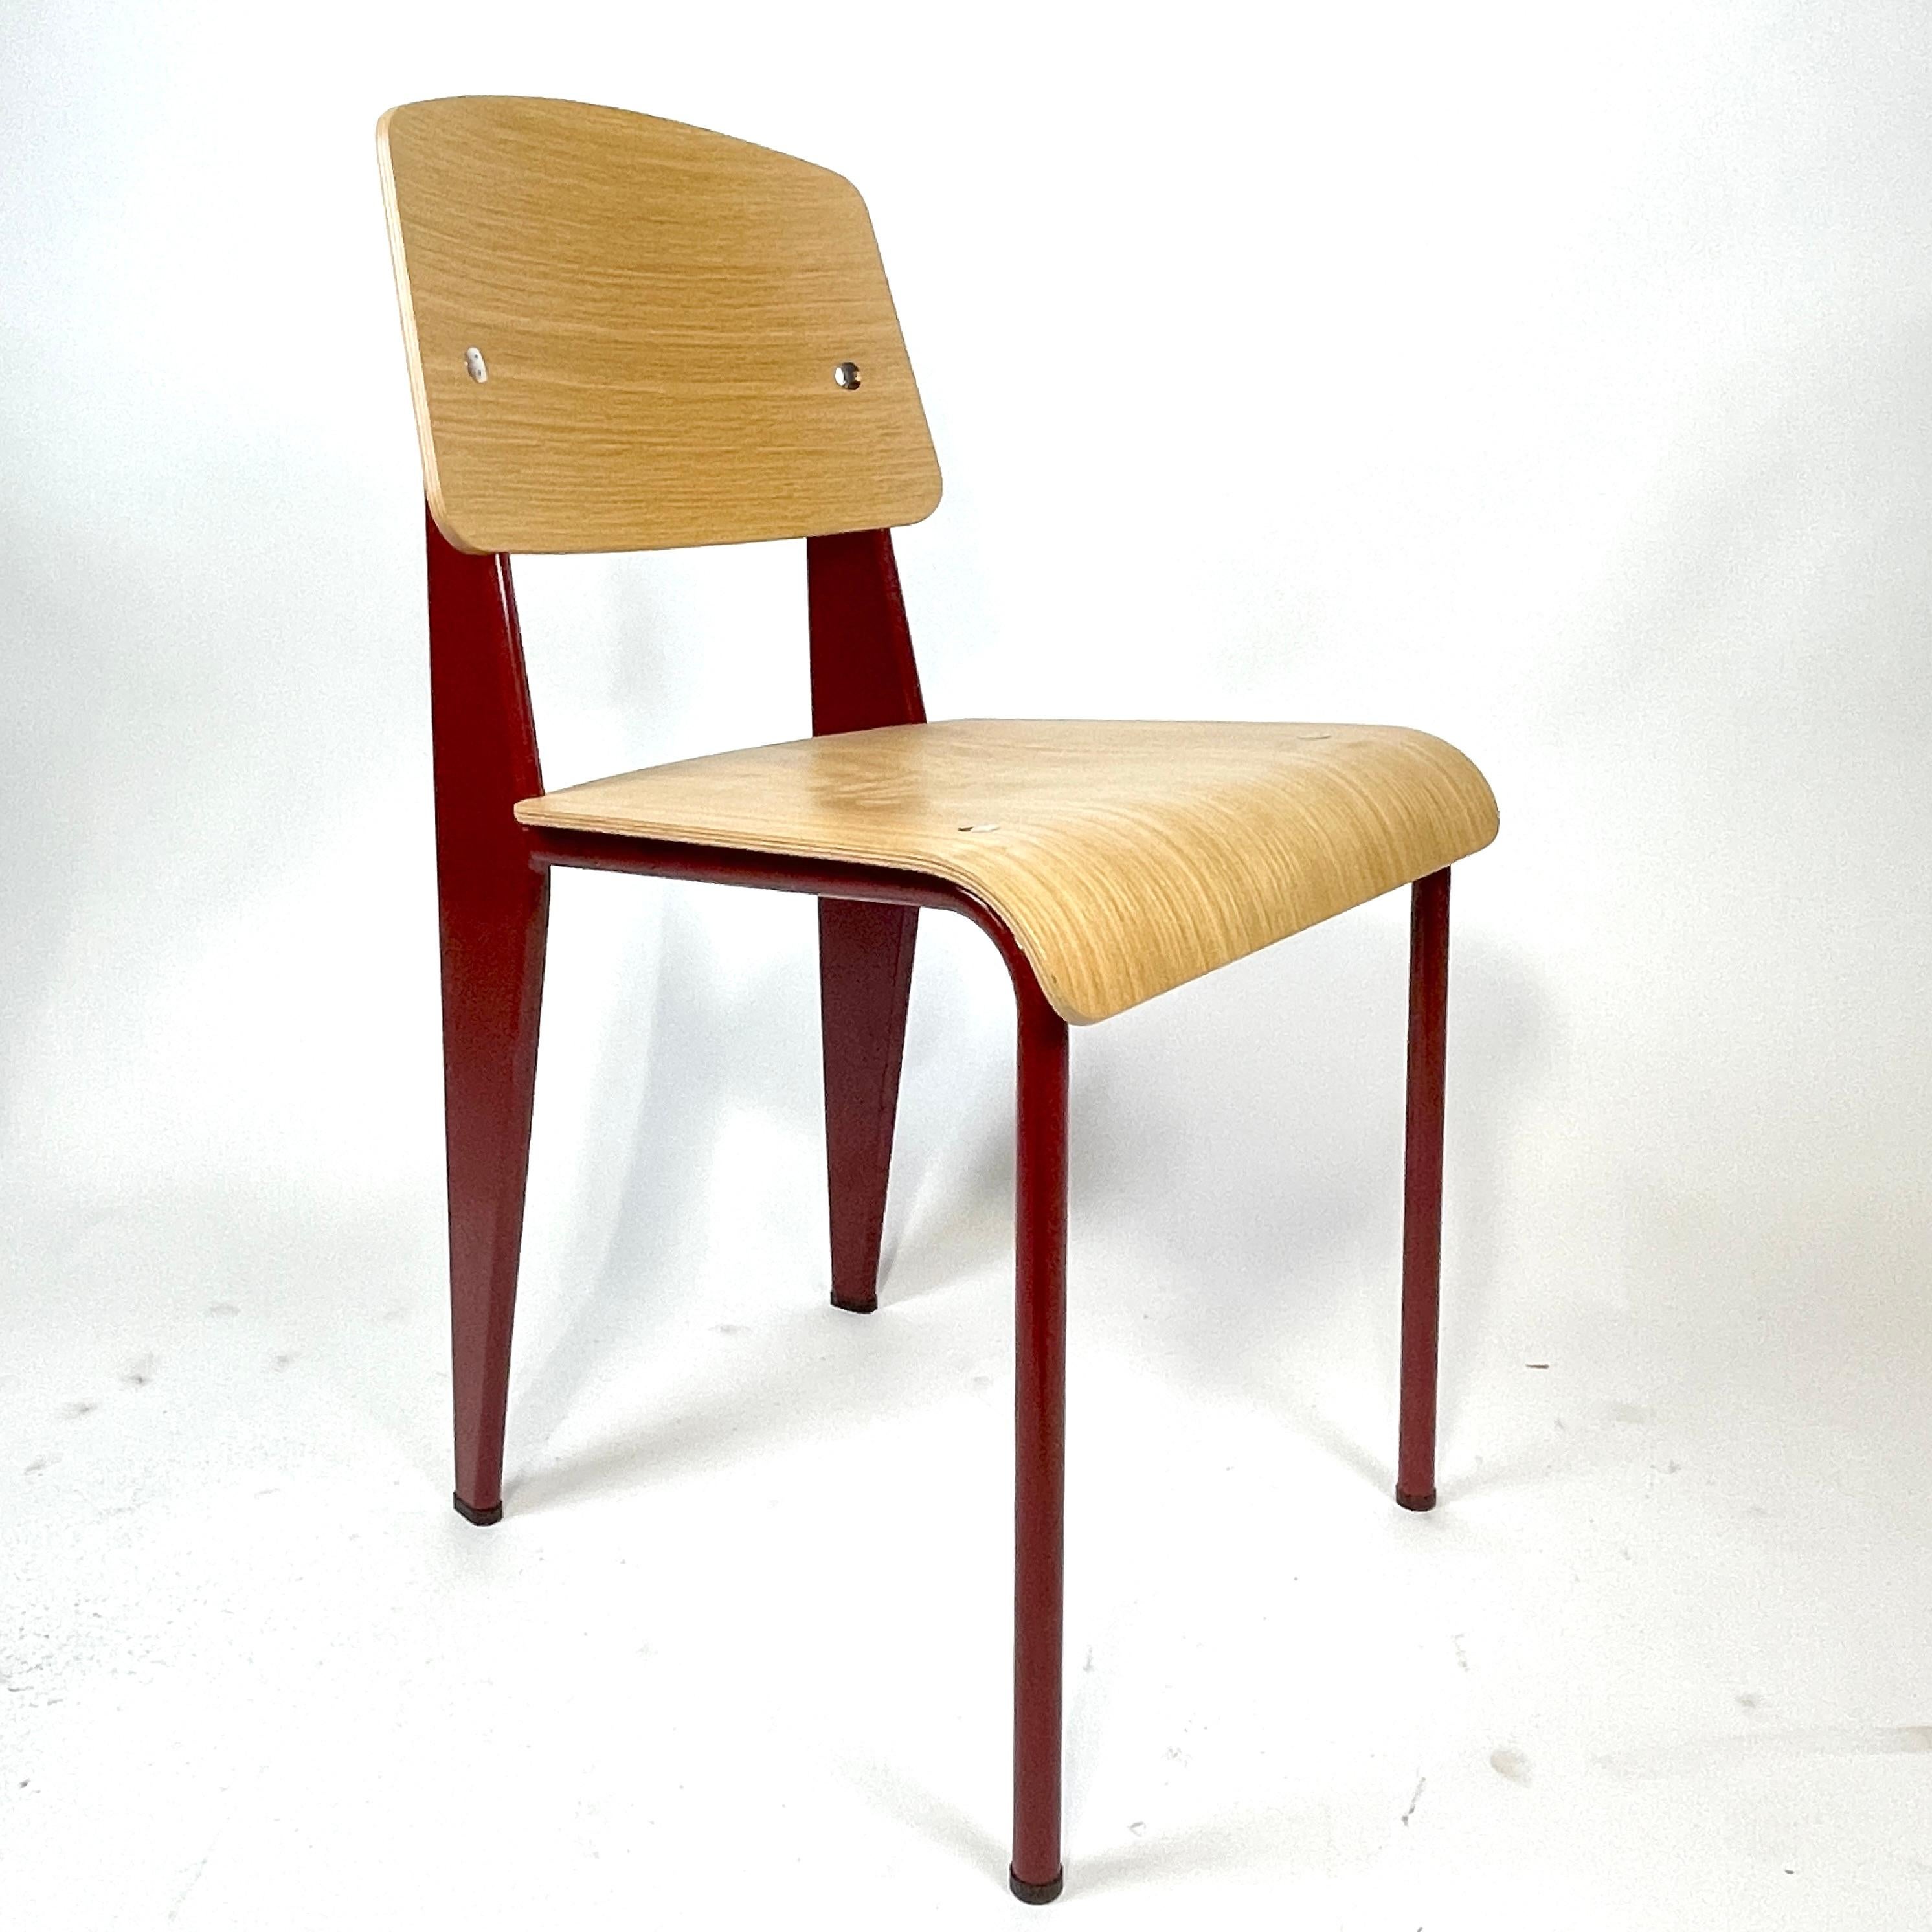 20th Century Jean Prouvé Dining Chair Japanese Red Steel and Natural Oak by Vitra (3 avail)